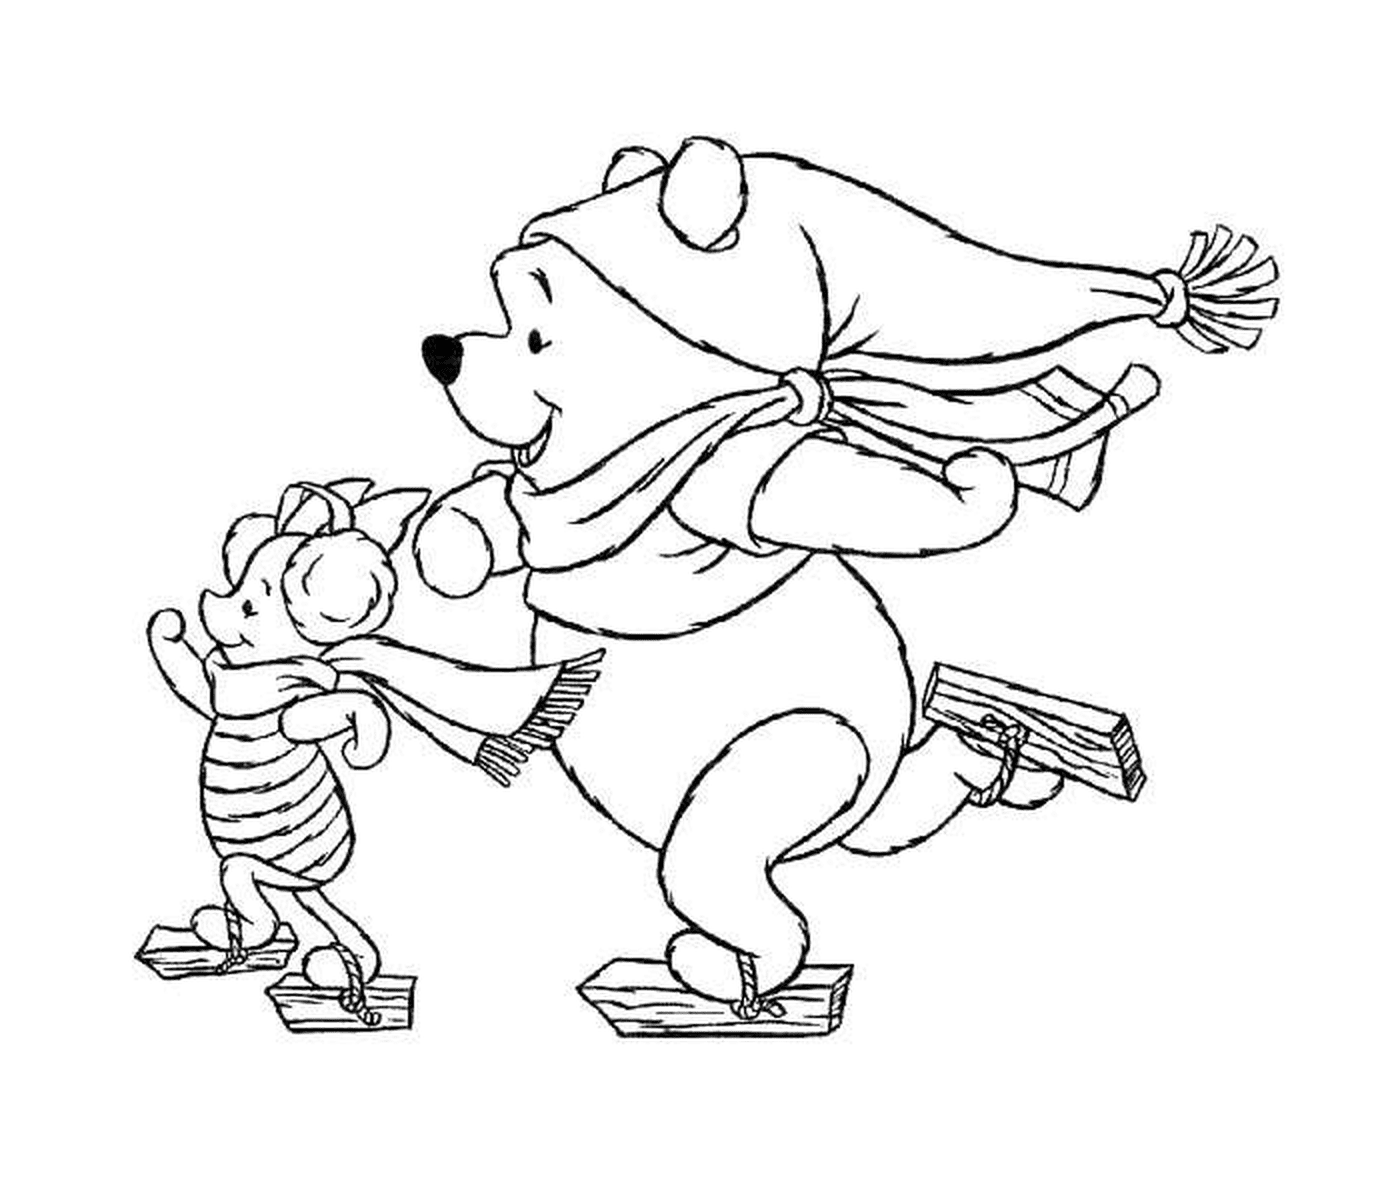  Winnie the bear and Porcinet 